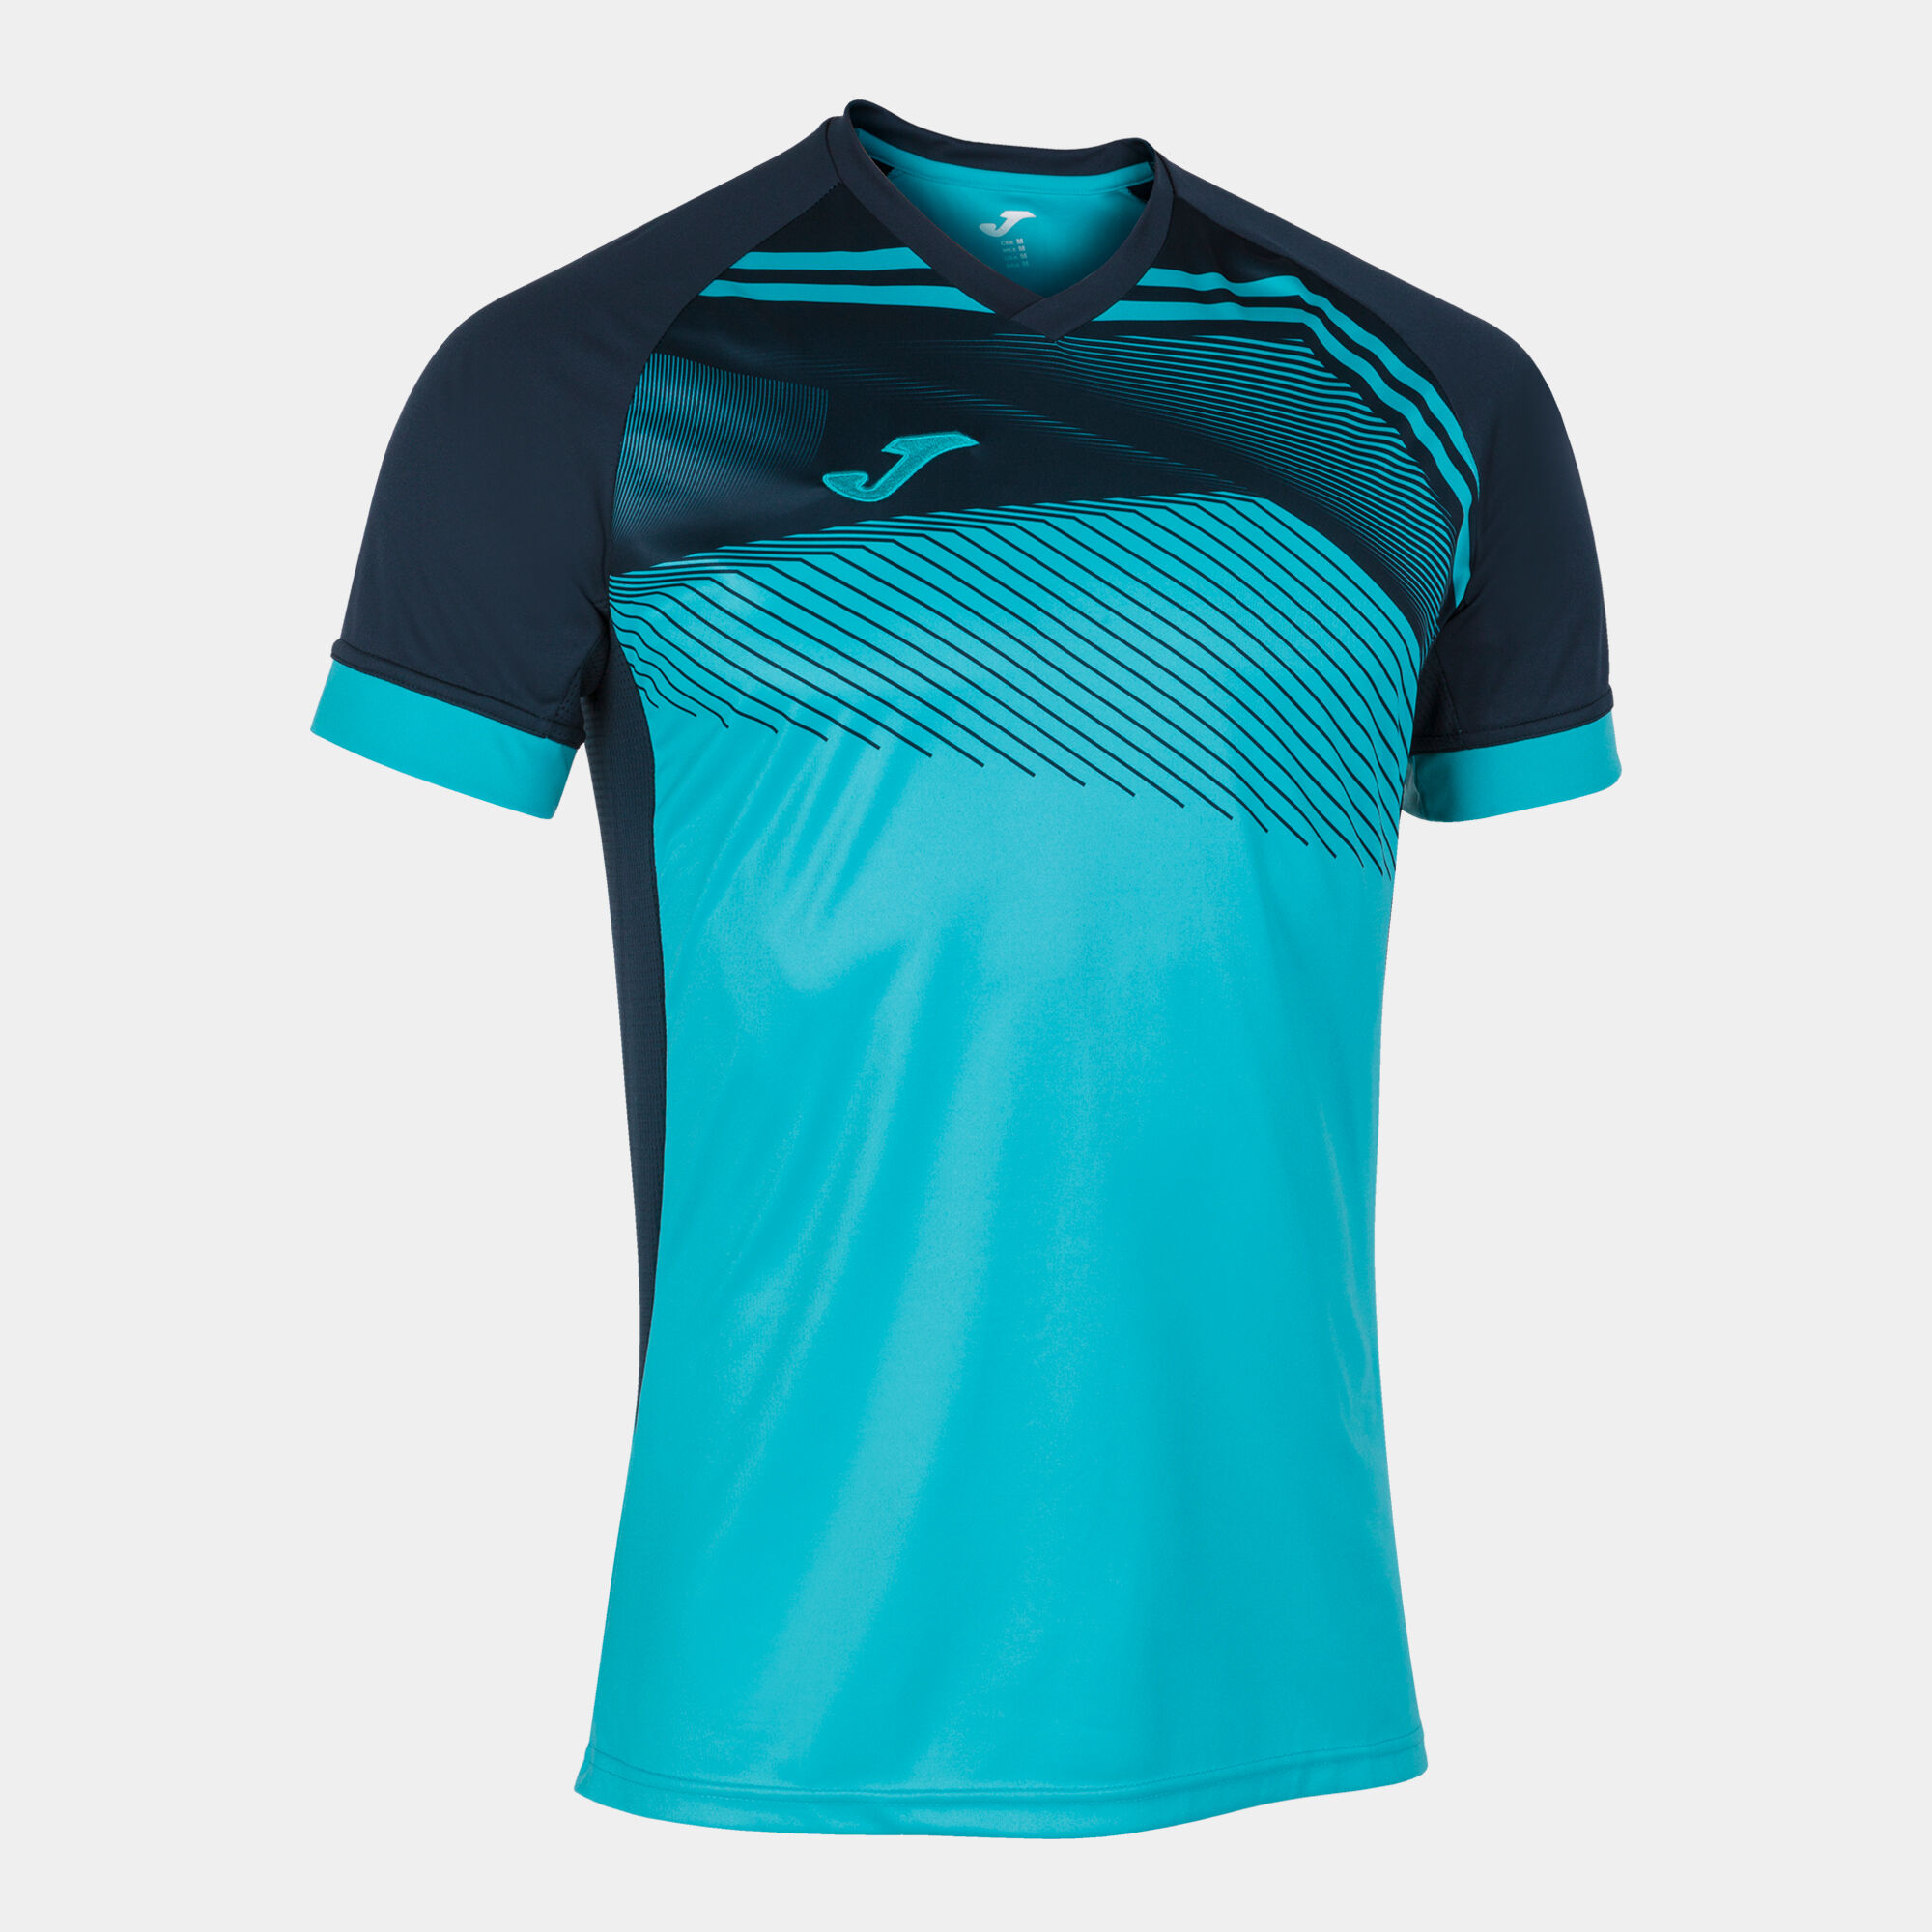 MAILLOT MANCHES COURTES HOMME SUPERNOVA II TURQUOISE FLUO BLEU MARINE